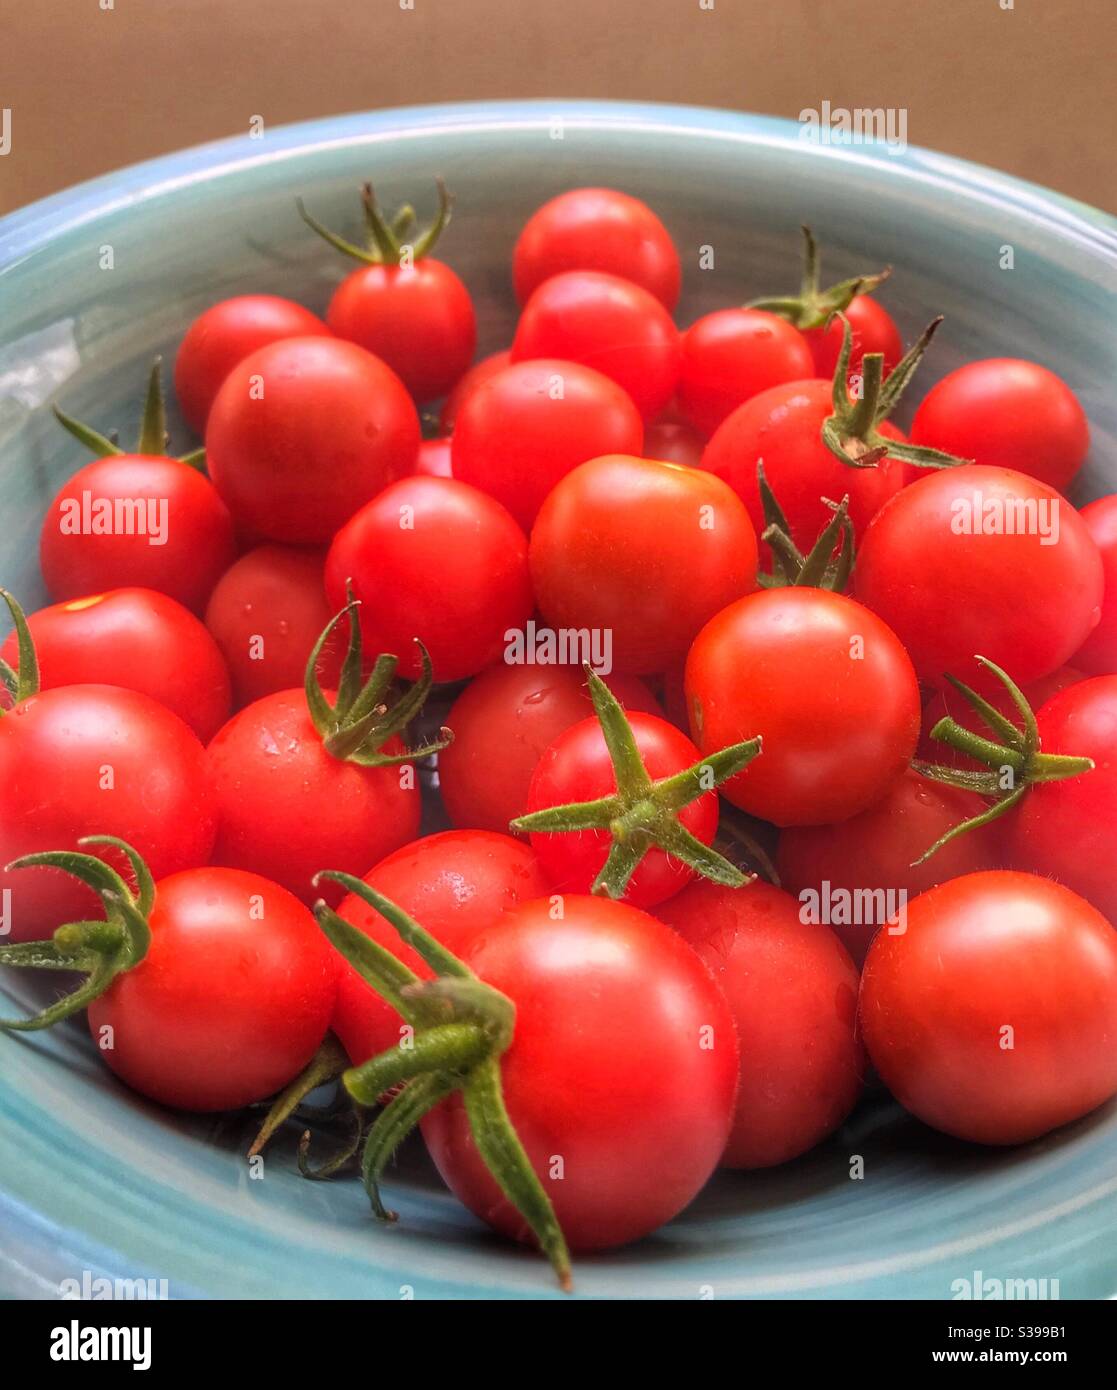 Cherry tomatoes in a bowl Stock Photo